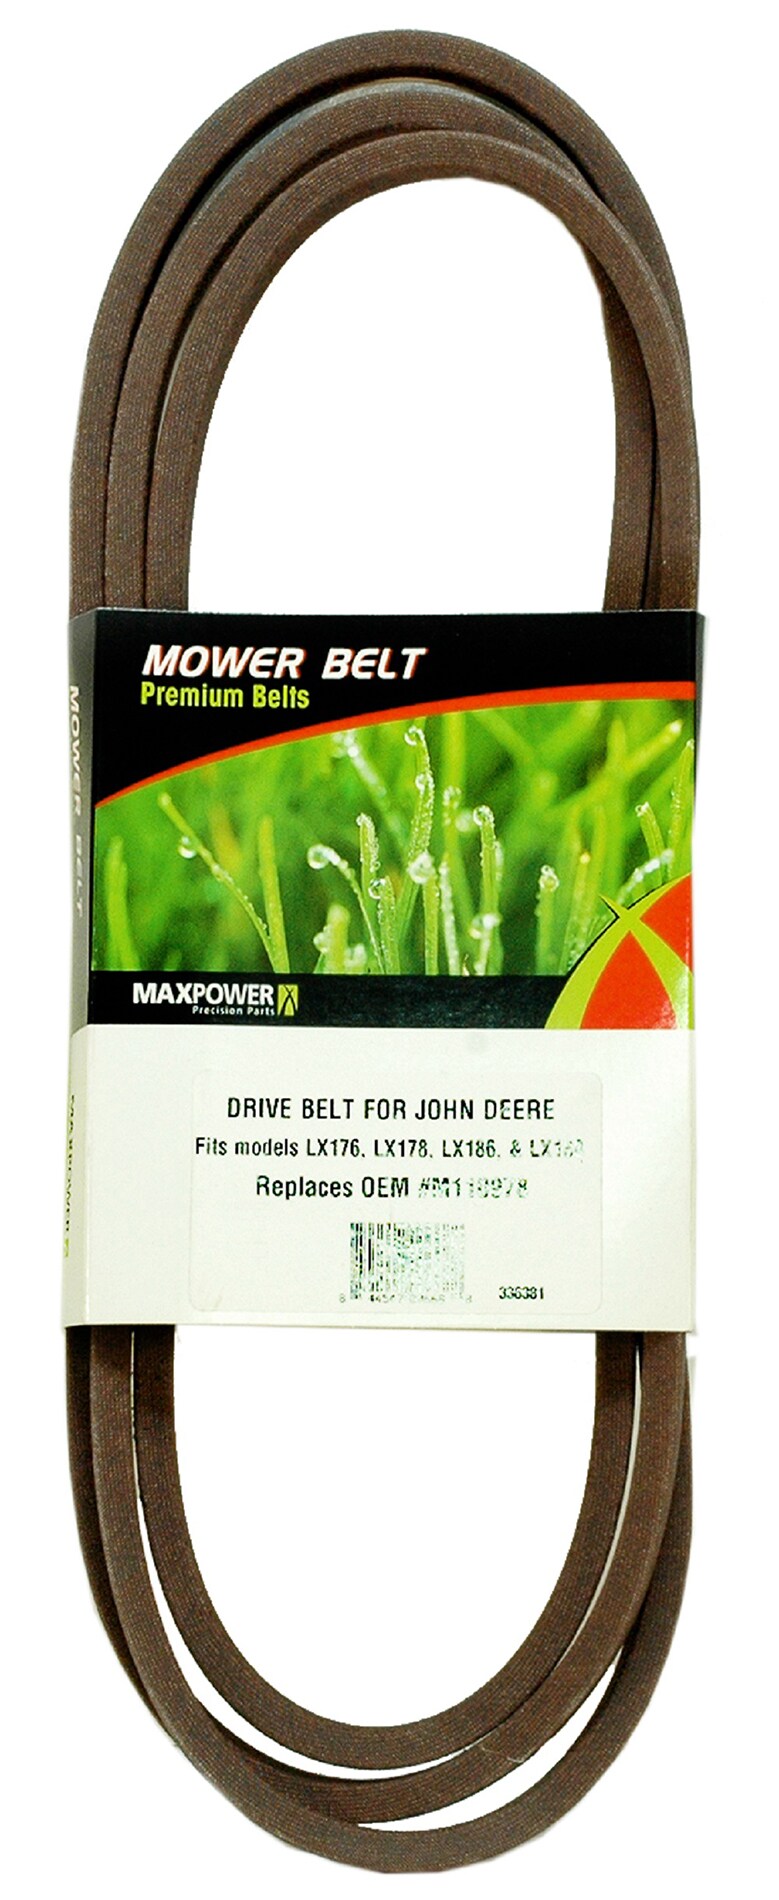 LX178 and LX188 Lawn mowers Drive Belt replaces M110978 for LX176 